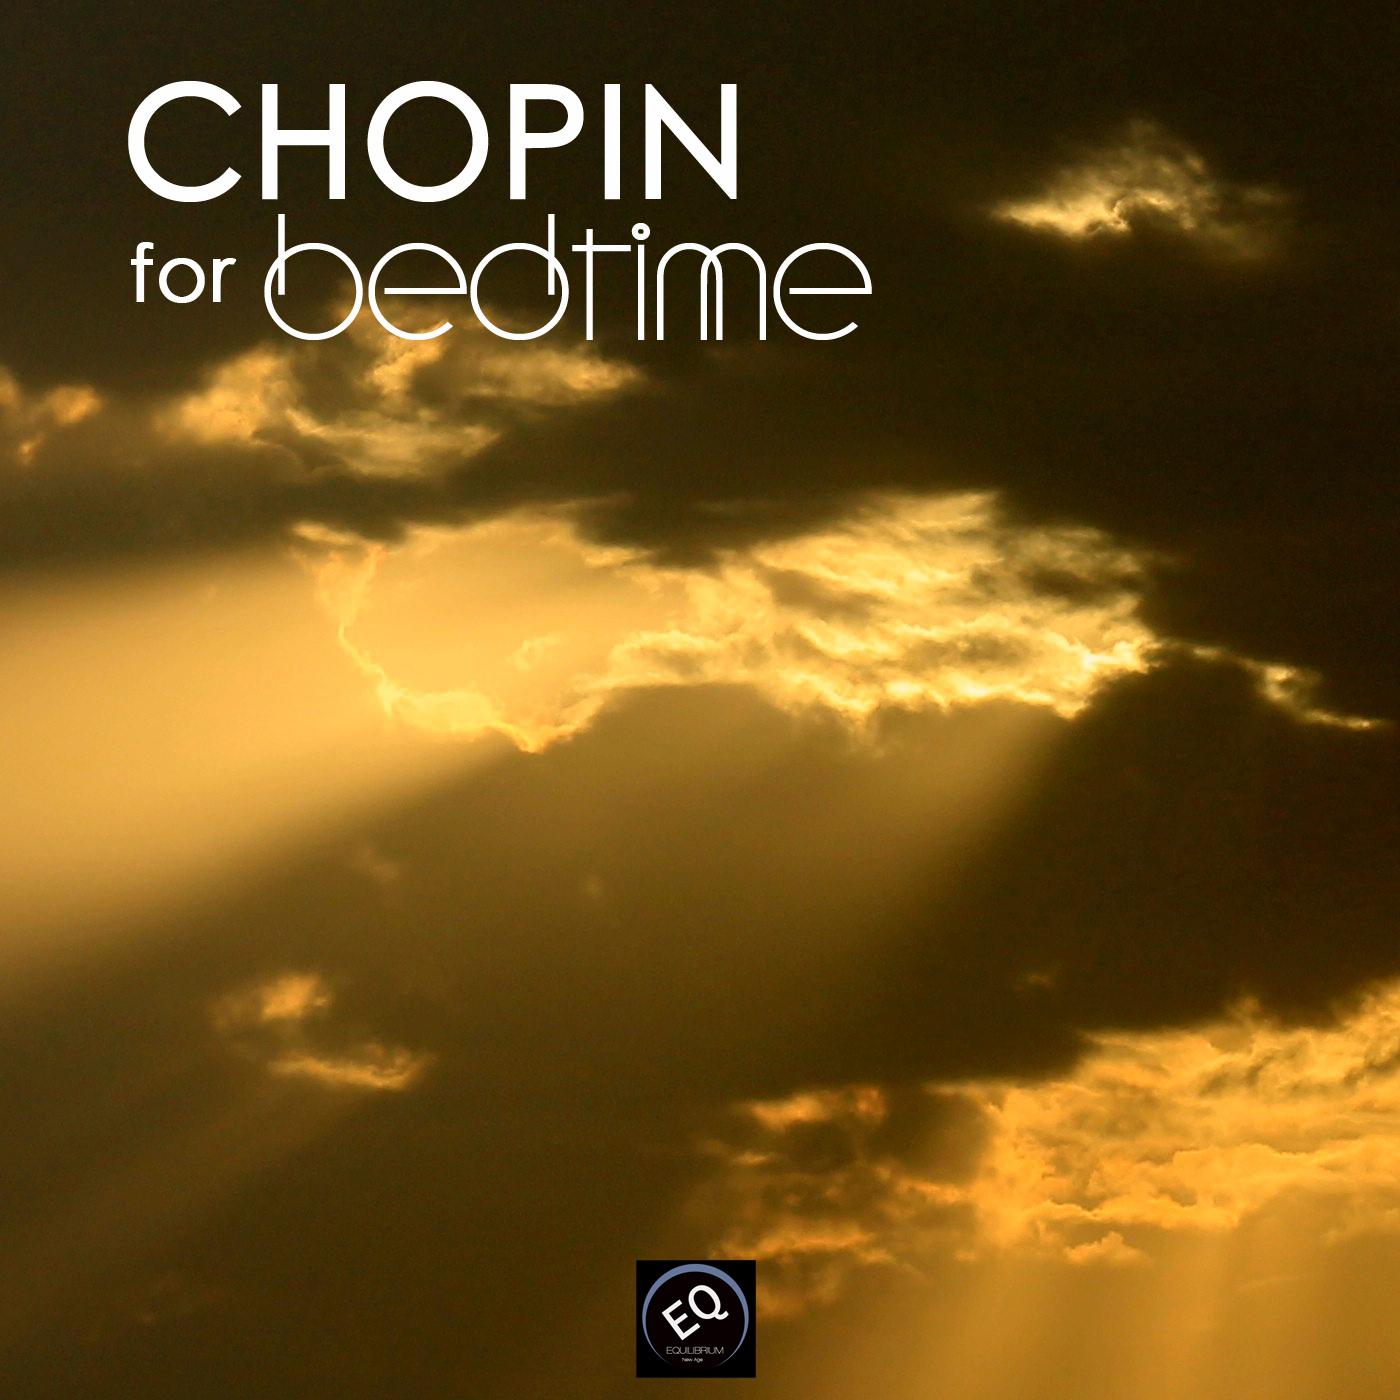 Chopin Prelude op 28 n 20 with Babbling Brooke Sound of Nature for Baby Relaxation